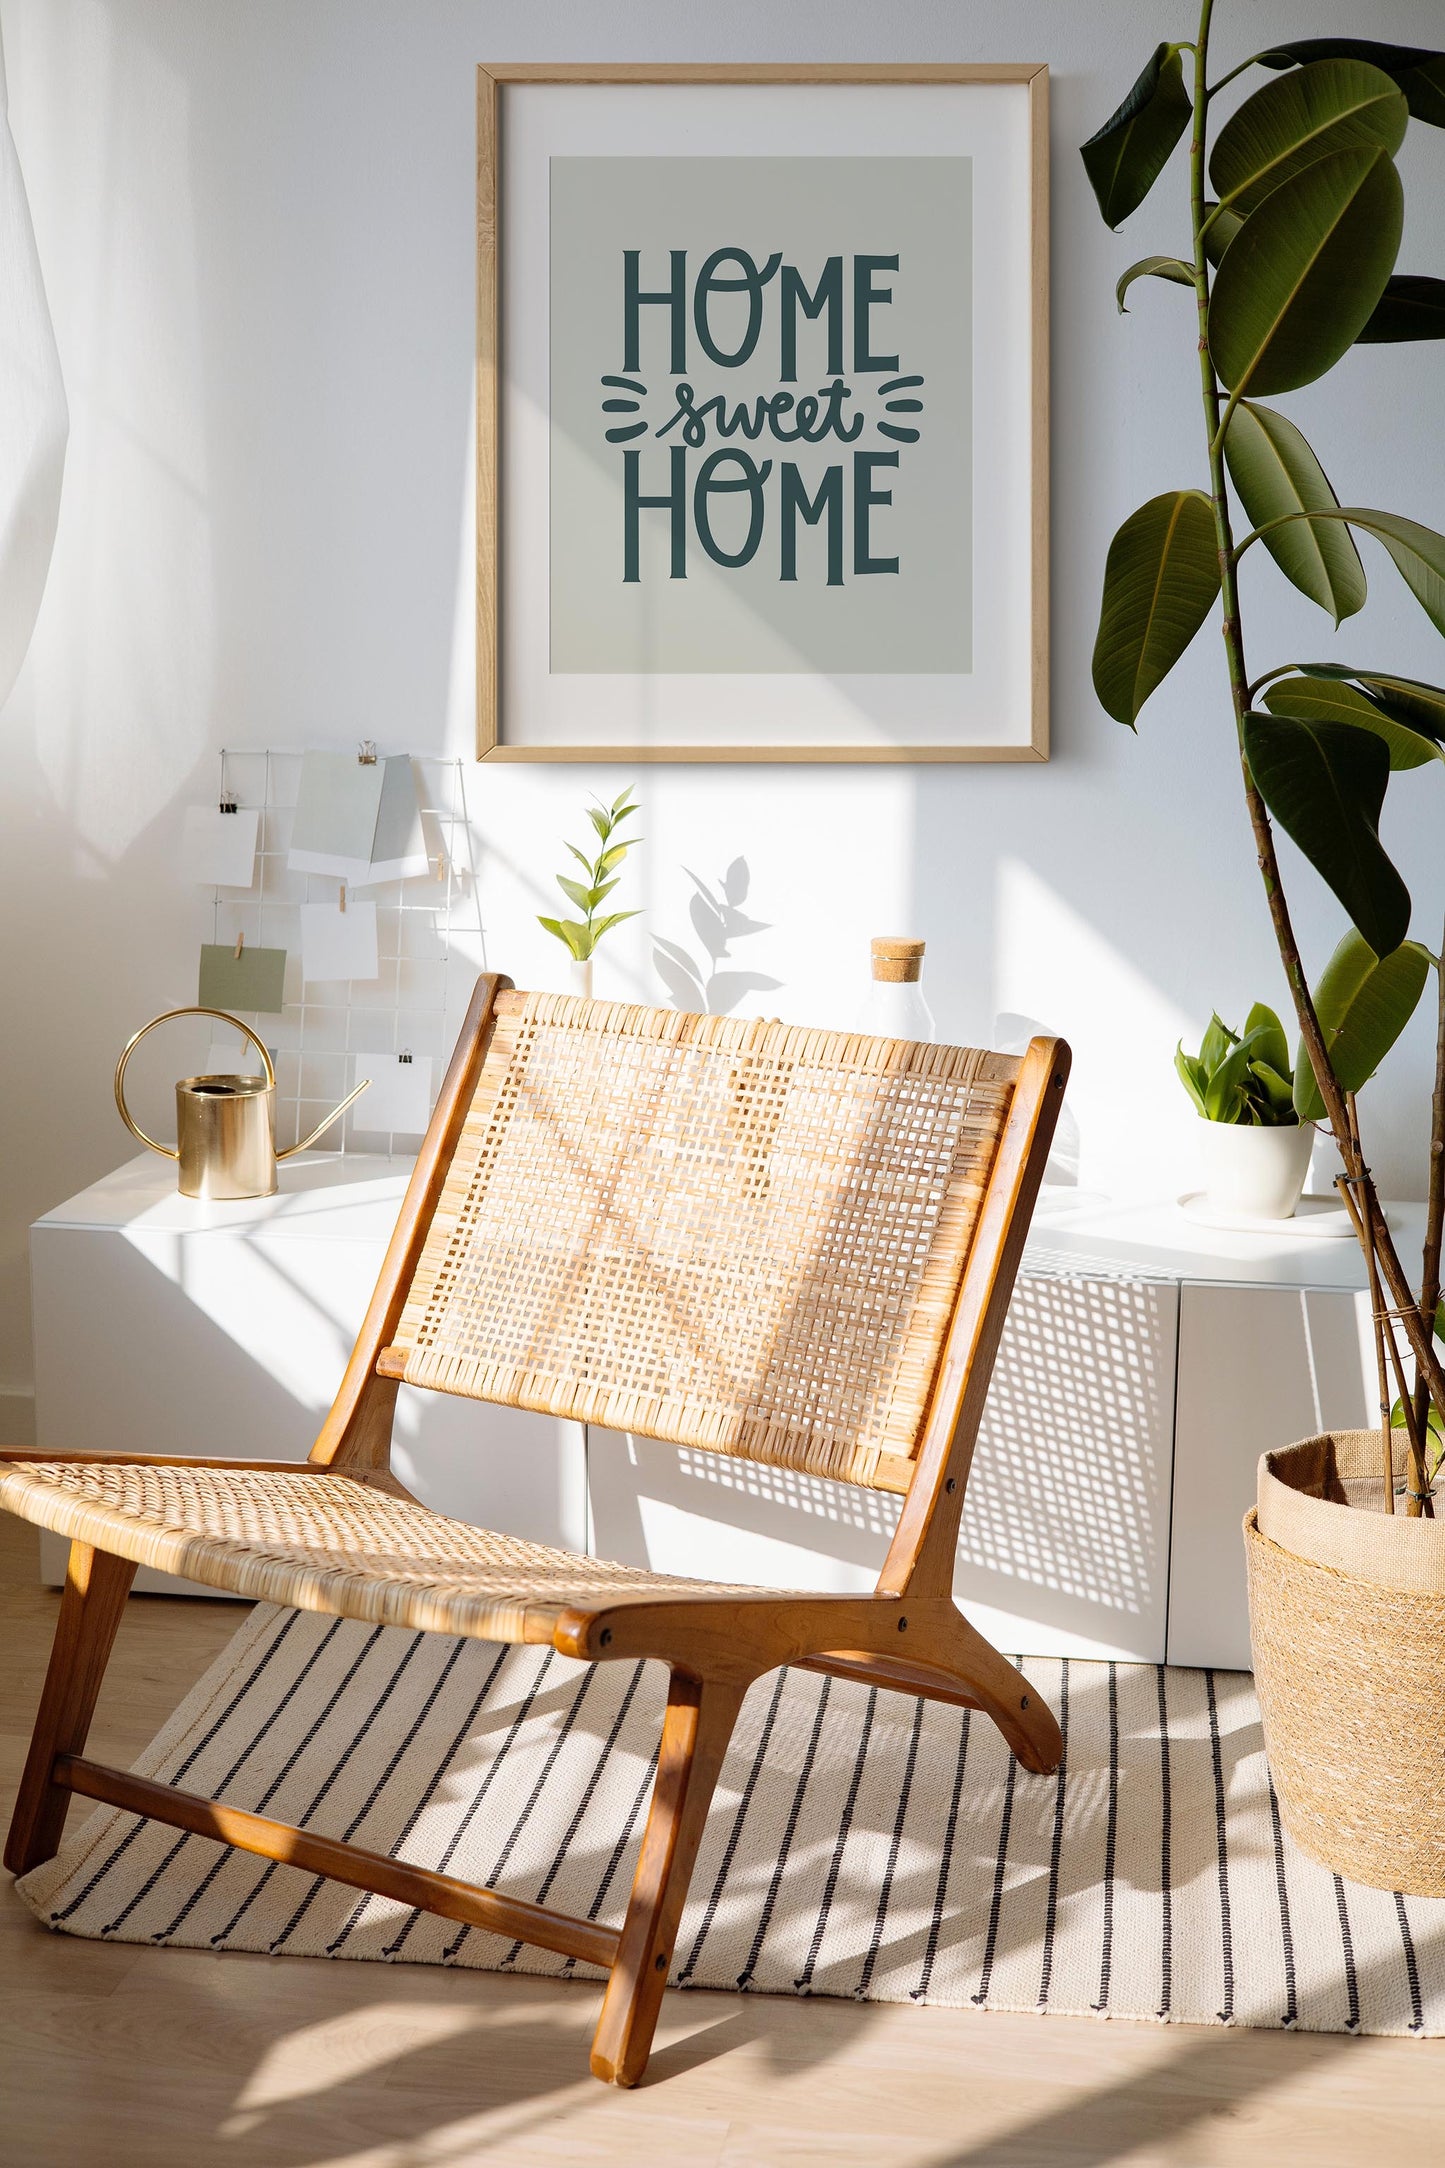 Home Sweet Home art print by Brenda Bird pictured in an office